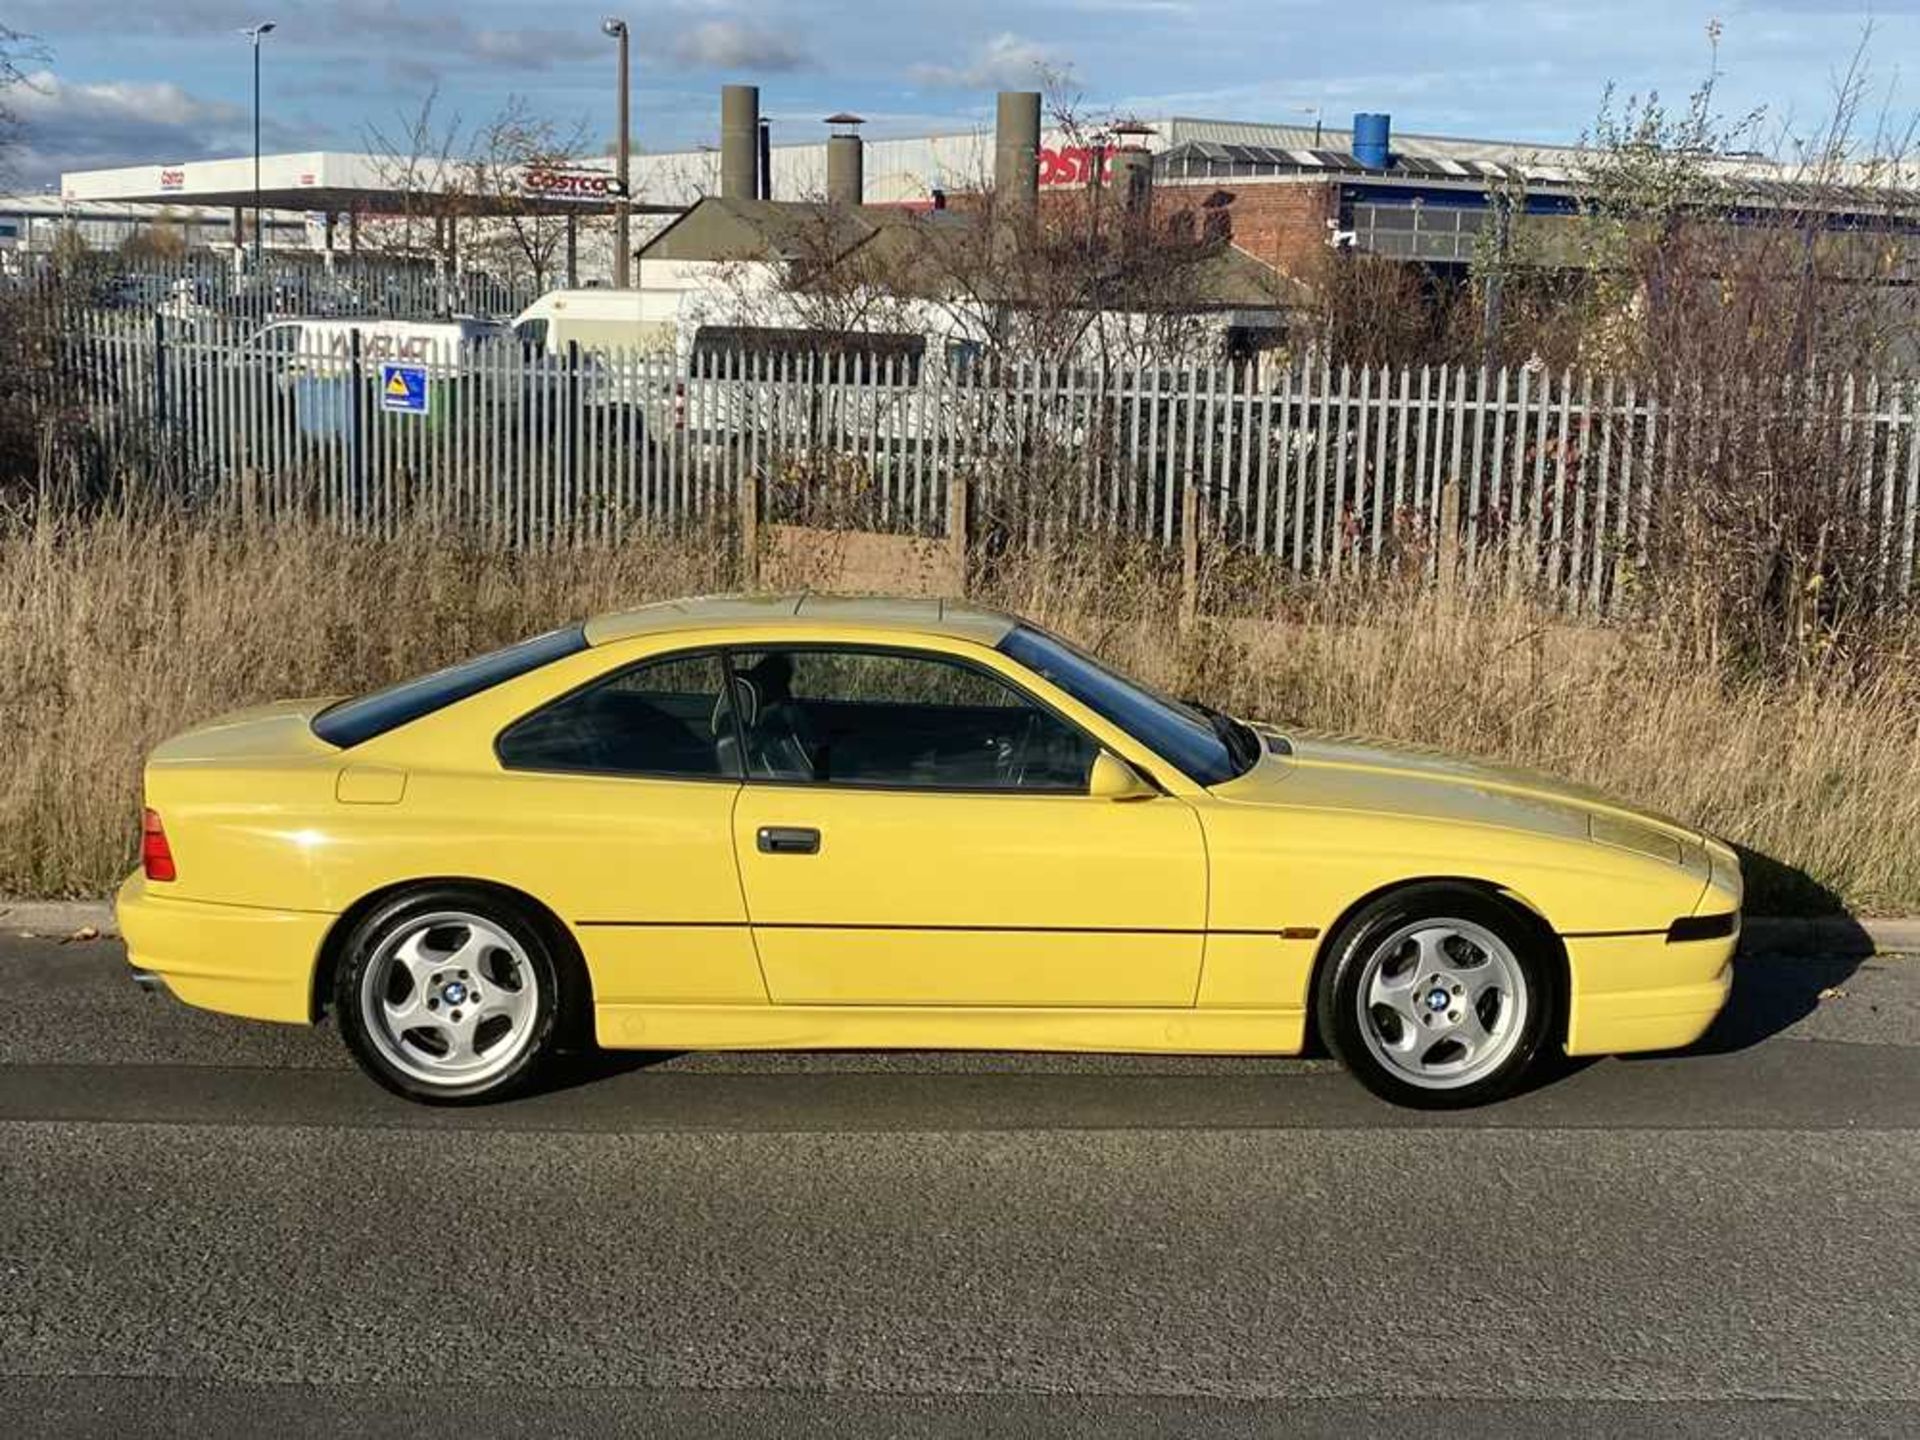 1997 BMW 840 CI Sport Understood to be 1 of just 38 finished in Dakar Yellow II - Image 13 of 79